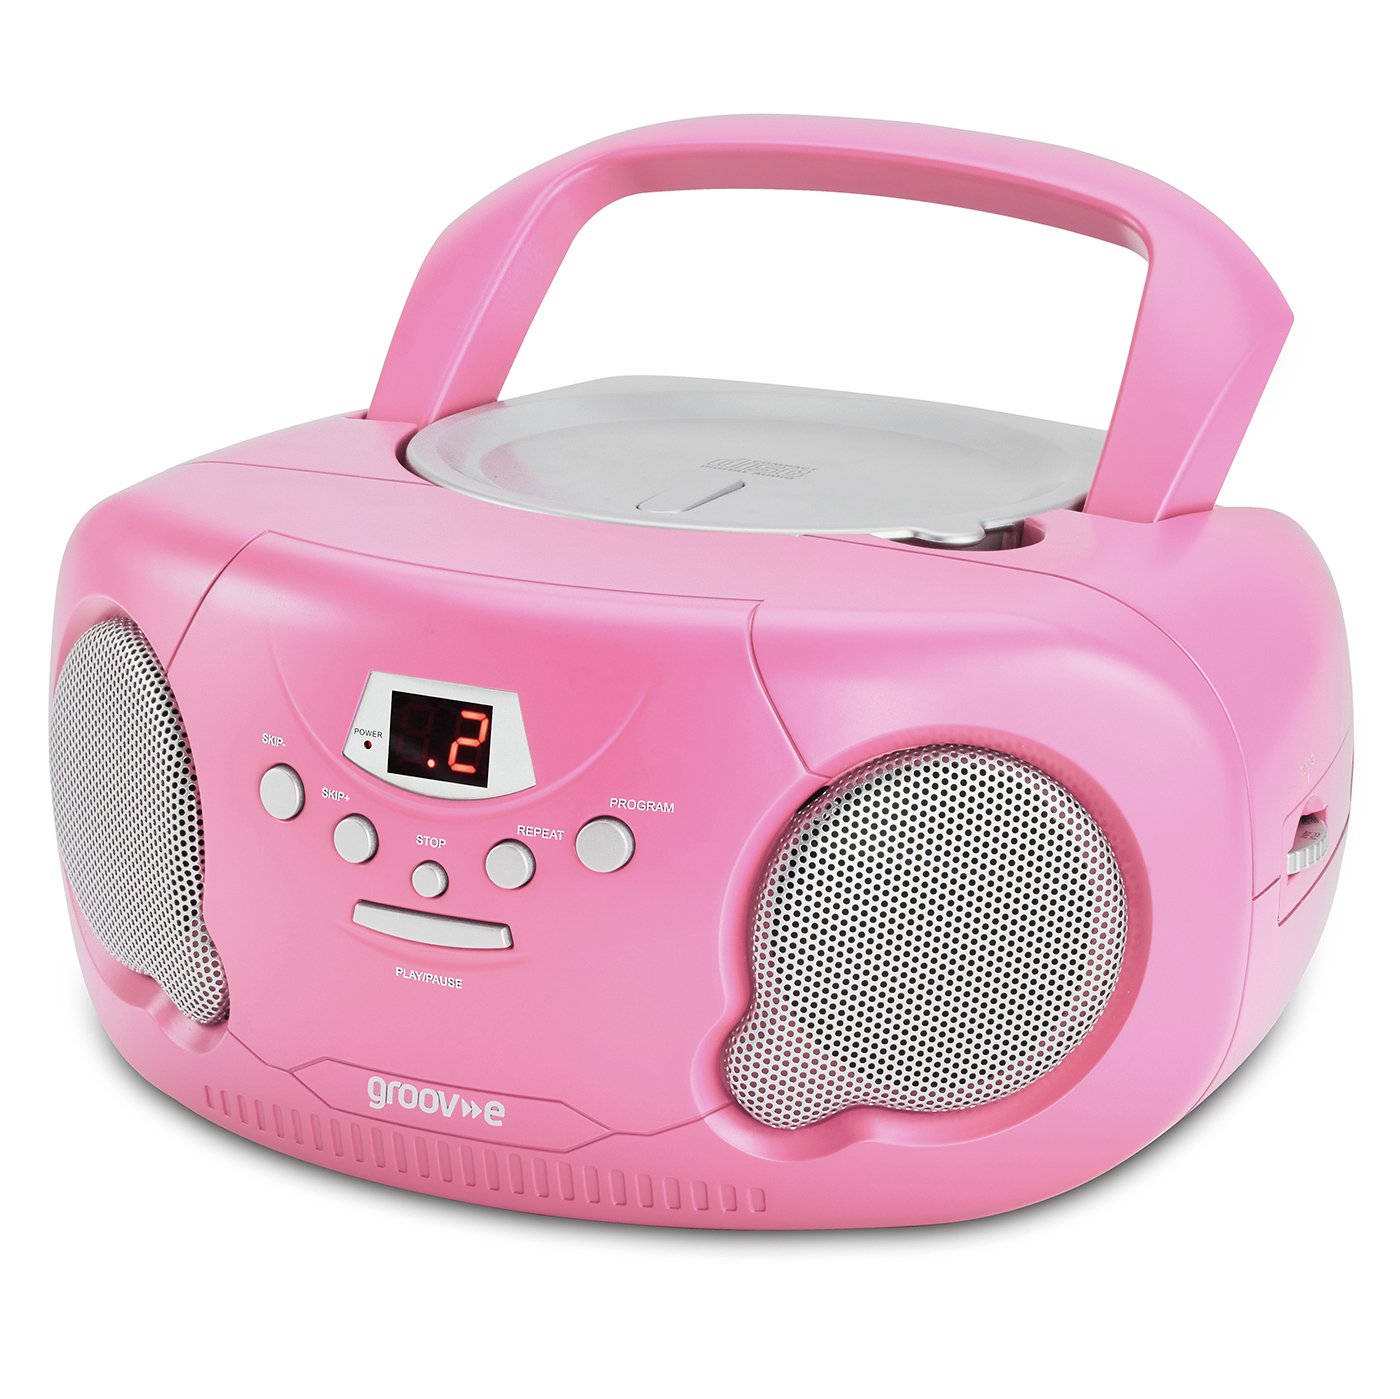 Groove Boombox CD Player with Radio - Pink 